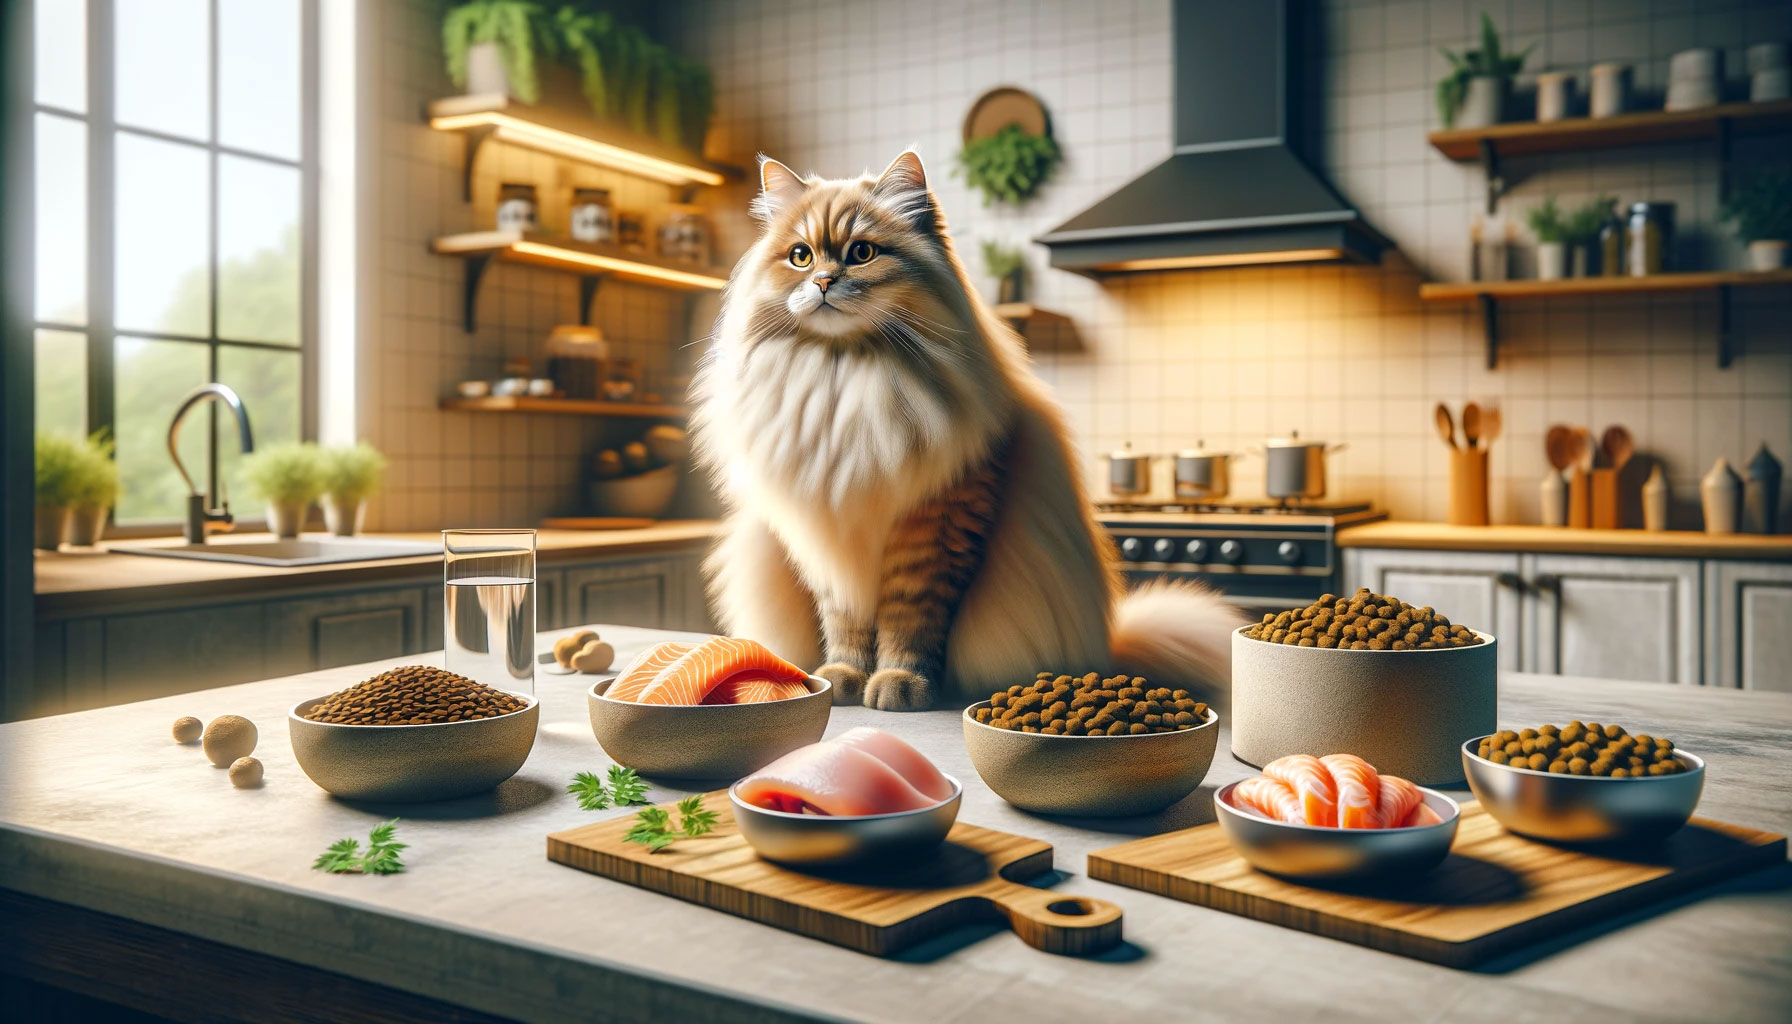 ultra-realistic-lo-fi-style-image-illustrating-the-best-diet-for-himalayan-cats